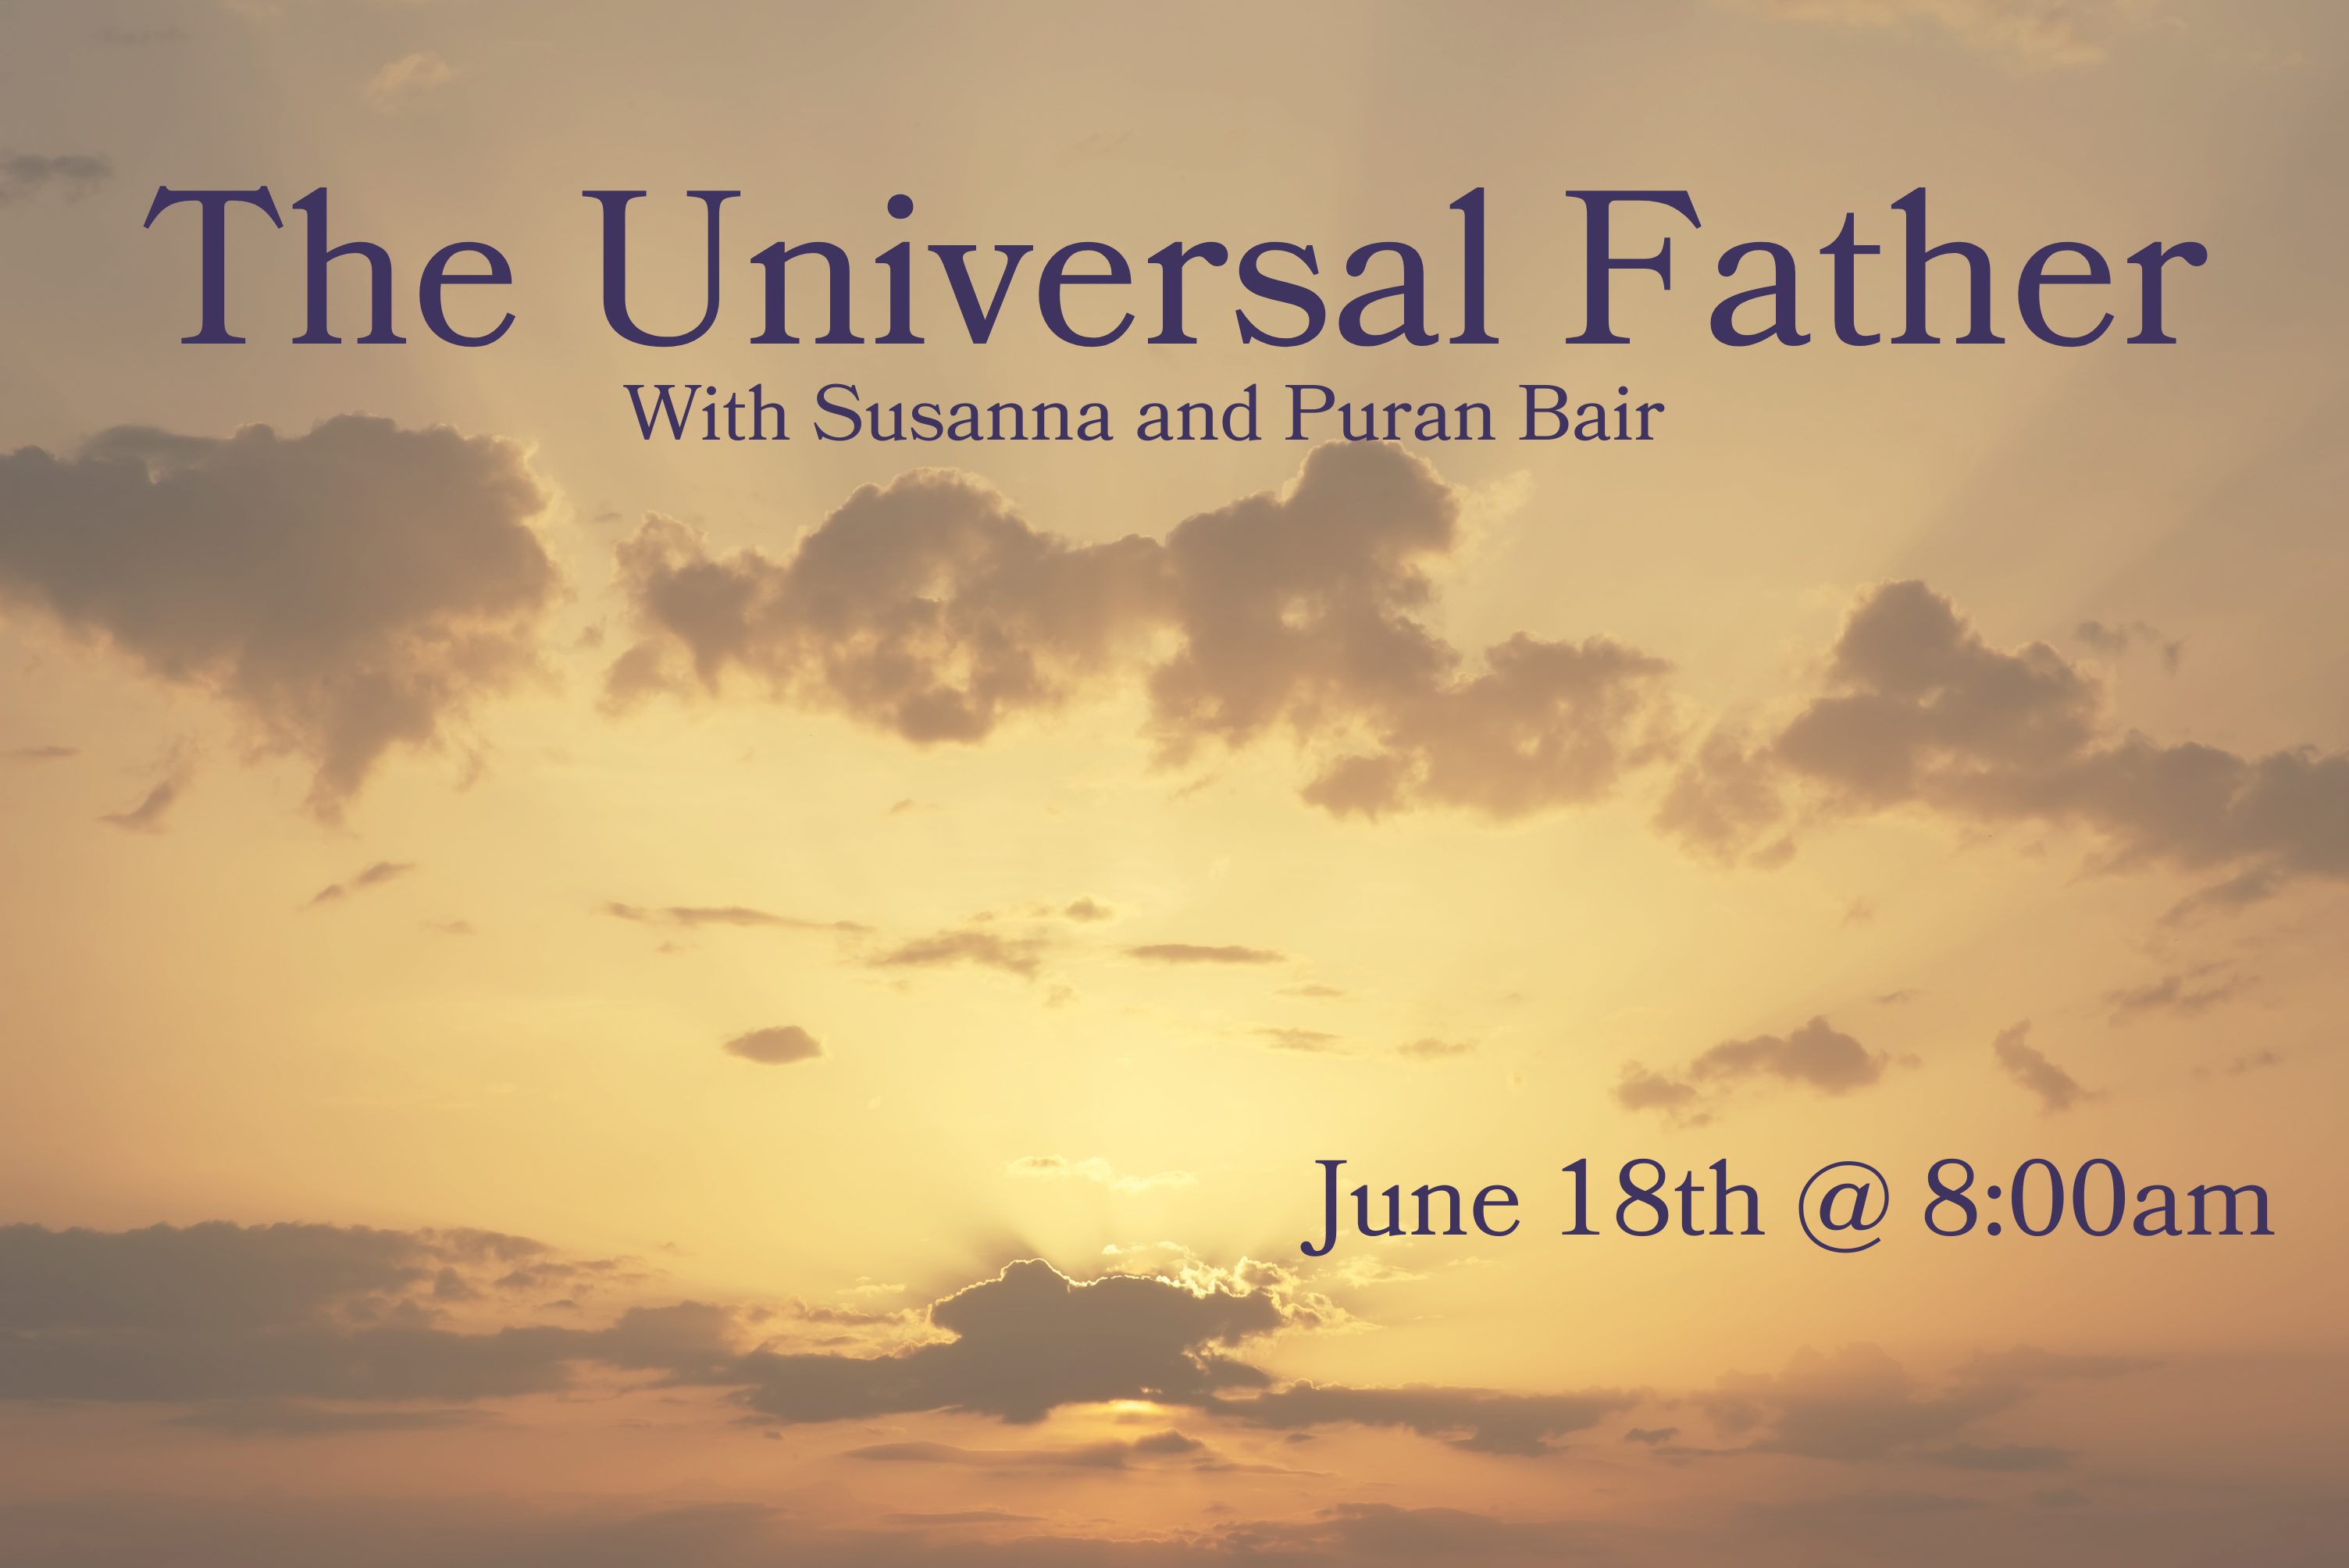 The Universal Father